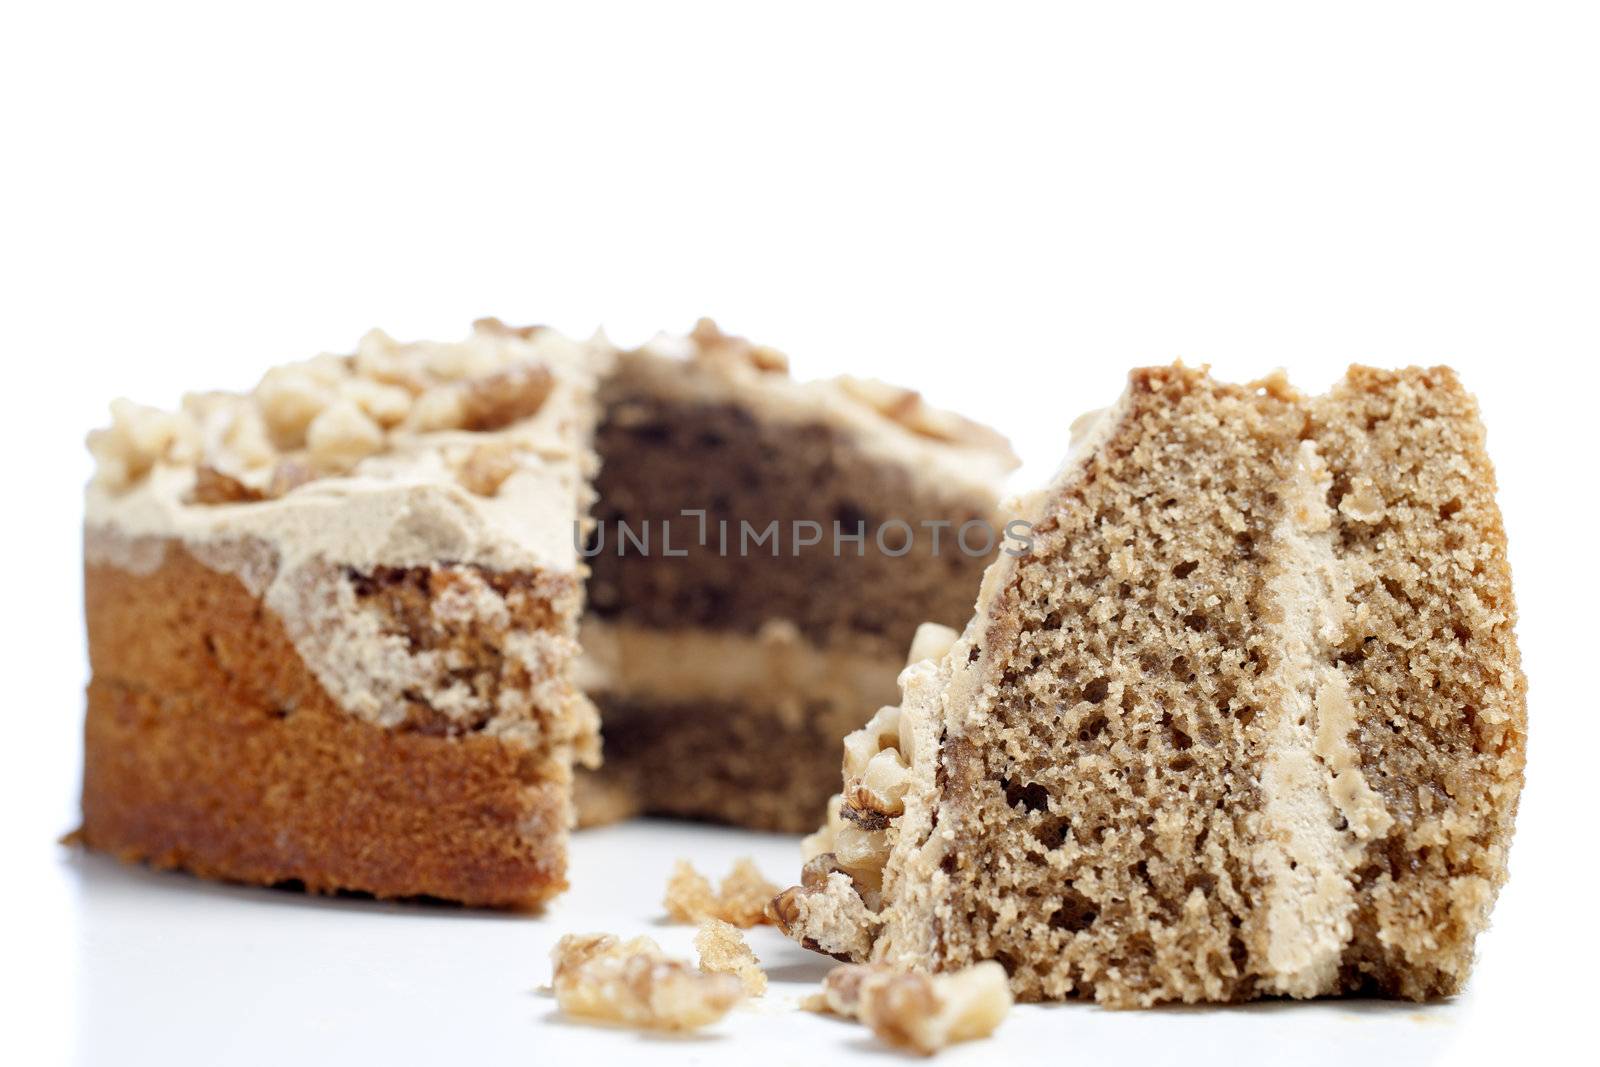 Sliced coffee cake ready for serving